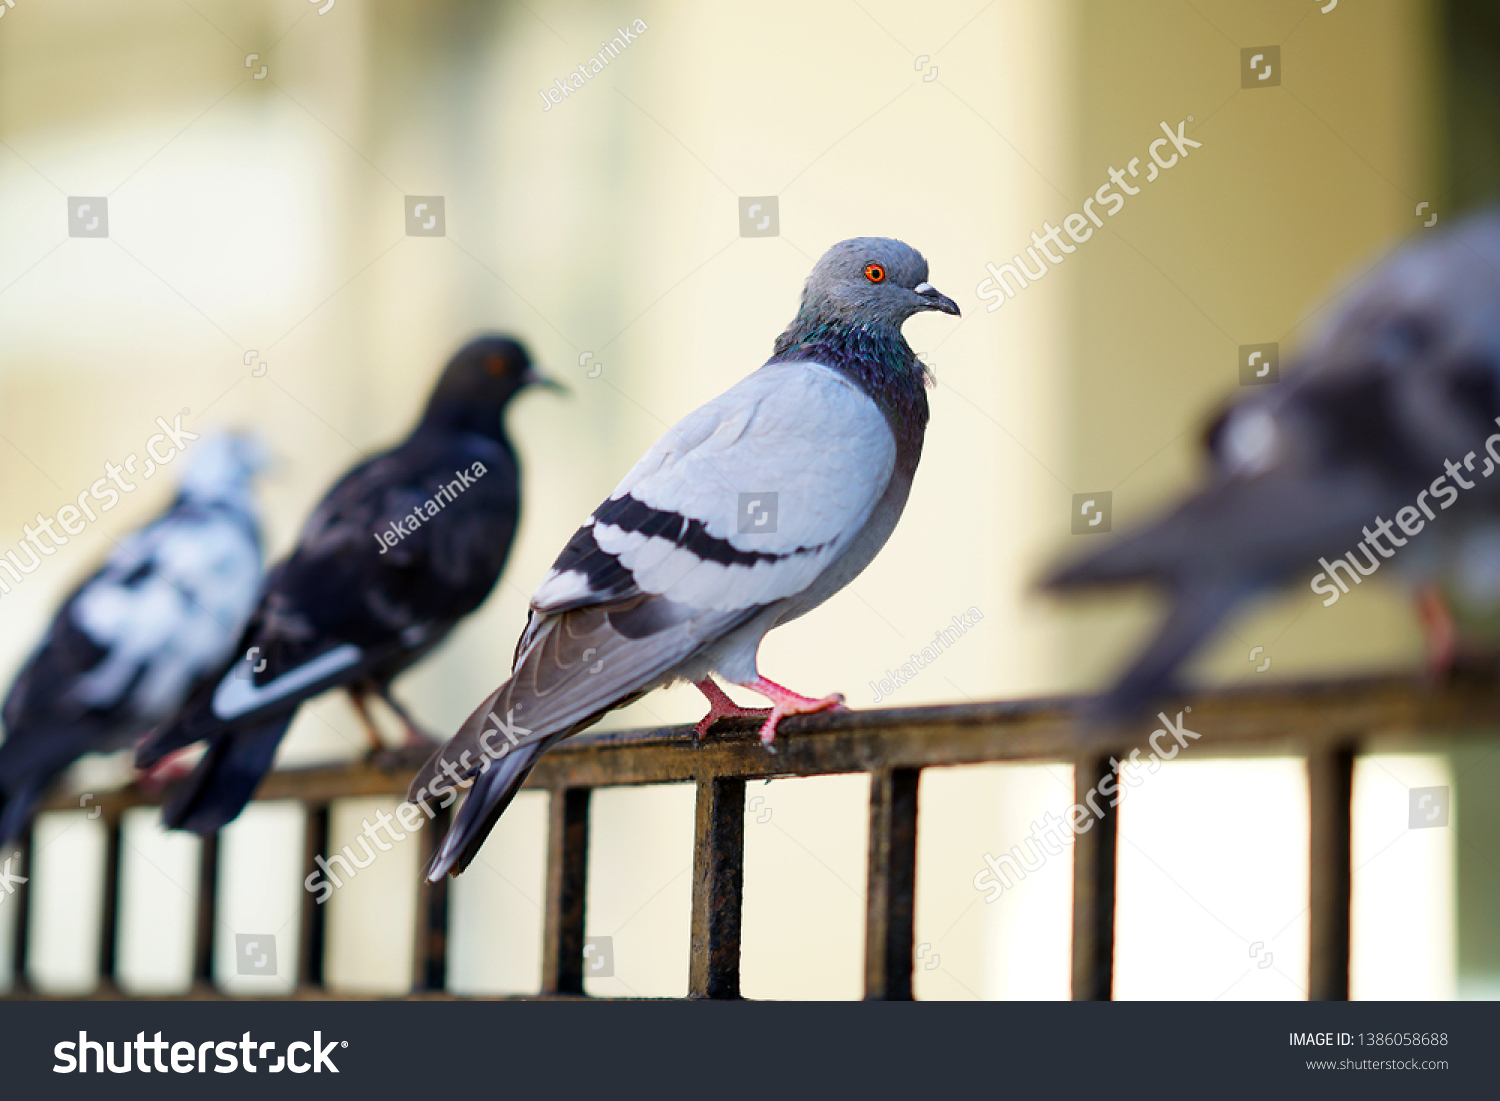 Group of pigeons on a fence in Crete, Greece #1386058688